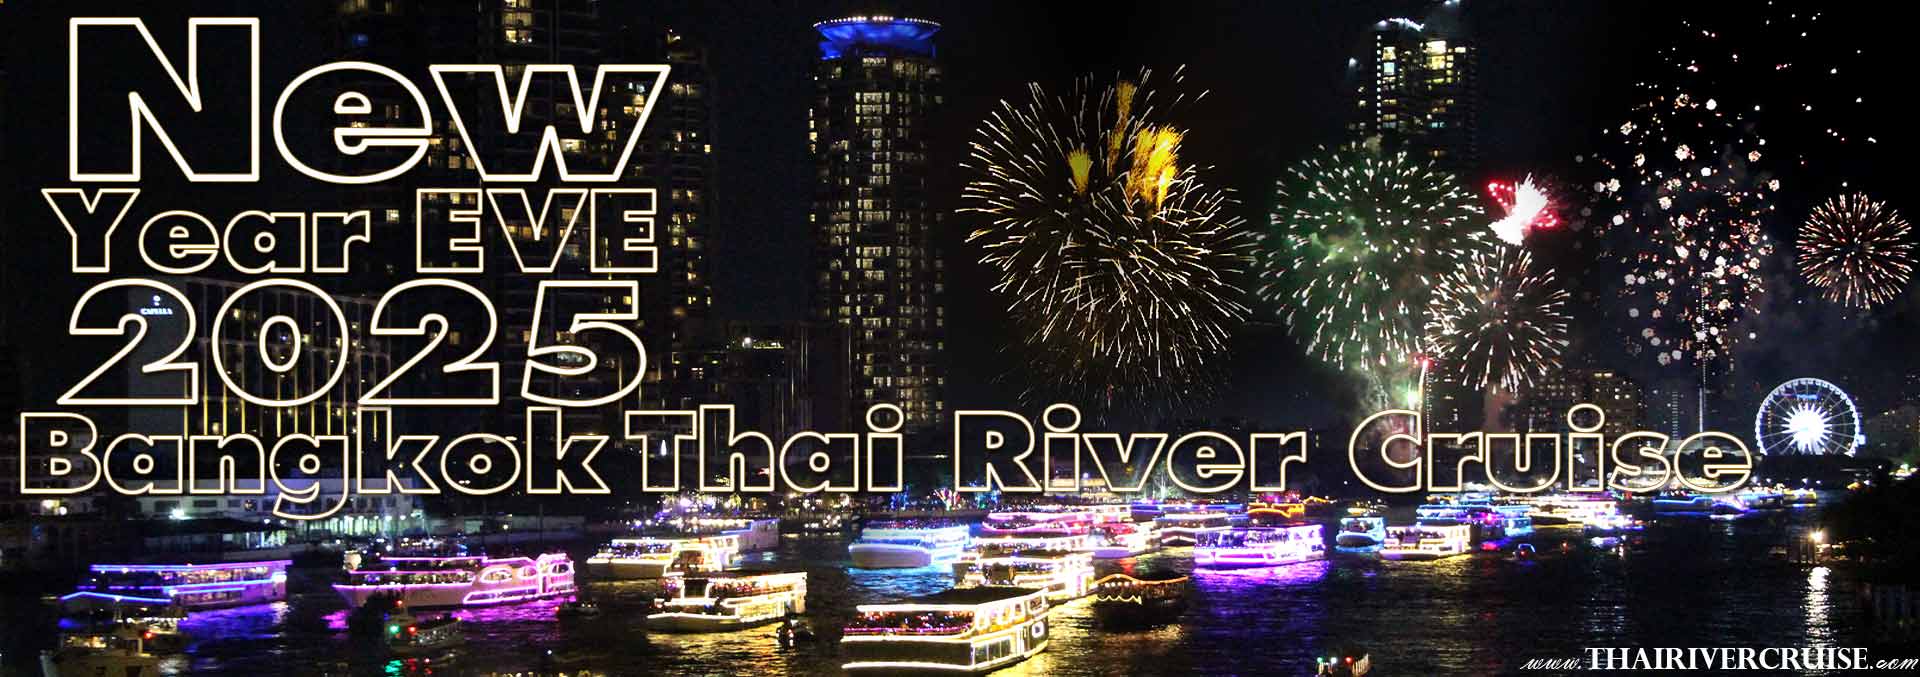 The Best New Year's Eve 2025 Dinner Cruise In Bangkok for New Year Eve 2024 Bangkok Fireworks  New Years Eve Bangkok 2025 Dinner Countdown River Cruise on the Chao Phraya River Bangkok Thailand on  31 December 2024 What are the best new year cruises in Thailand New year's eve bangkok 2024 tickets New year's eve bangkok 2025 packages Bangkok new years 2025 Bangkok new year 2023 Bangkok new year fireworks 2024 Bangkok new years eve river cruise When is Bangkok new year New year eve dinner bangkok 2024  Rooftop New Years Eve Party Bangkok Royal Galaxy Cruise. Let celebrate New Year Dinner Cruise from Asiatique The Riverfront